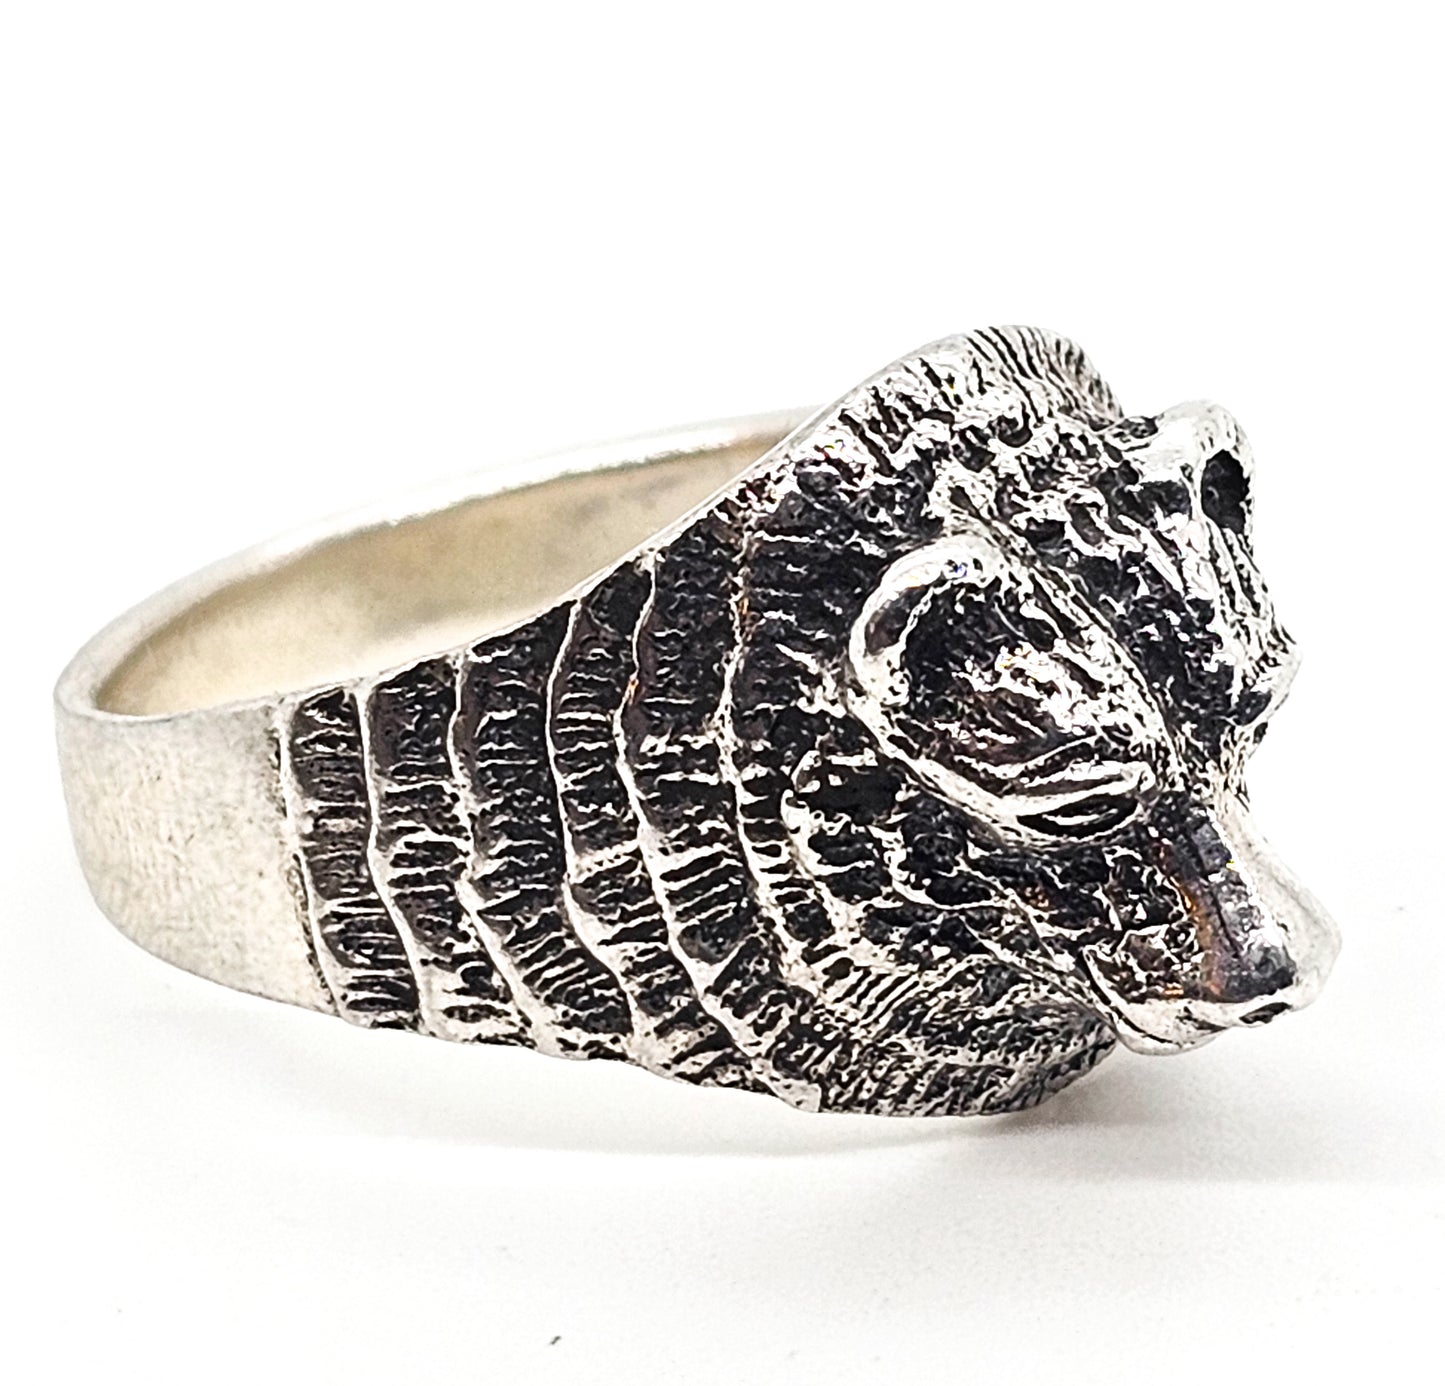 wTs Watson Hallmark Bear figural large solid sterling silver men's ring size 12